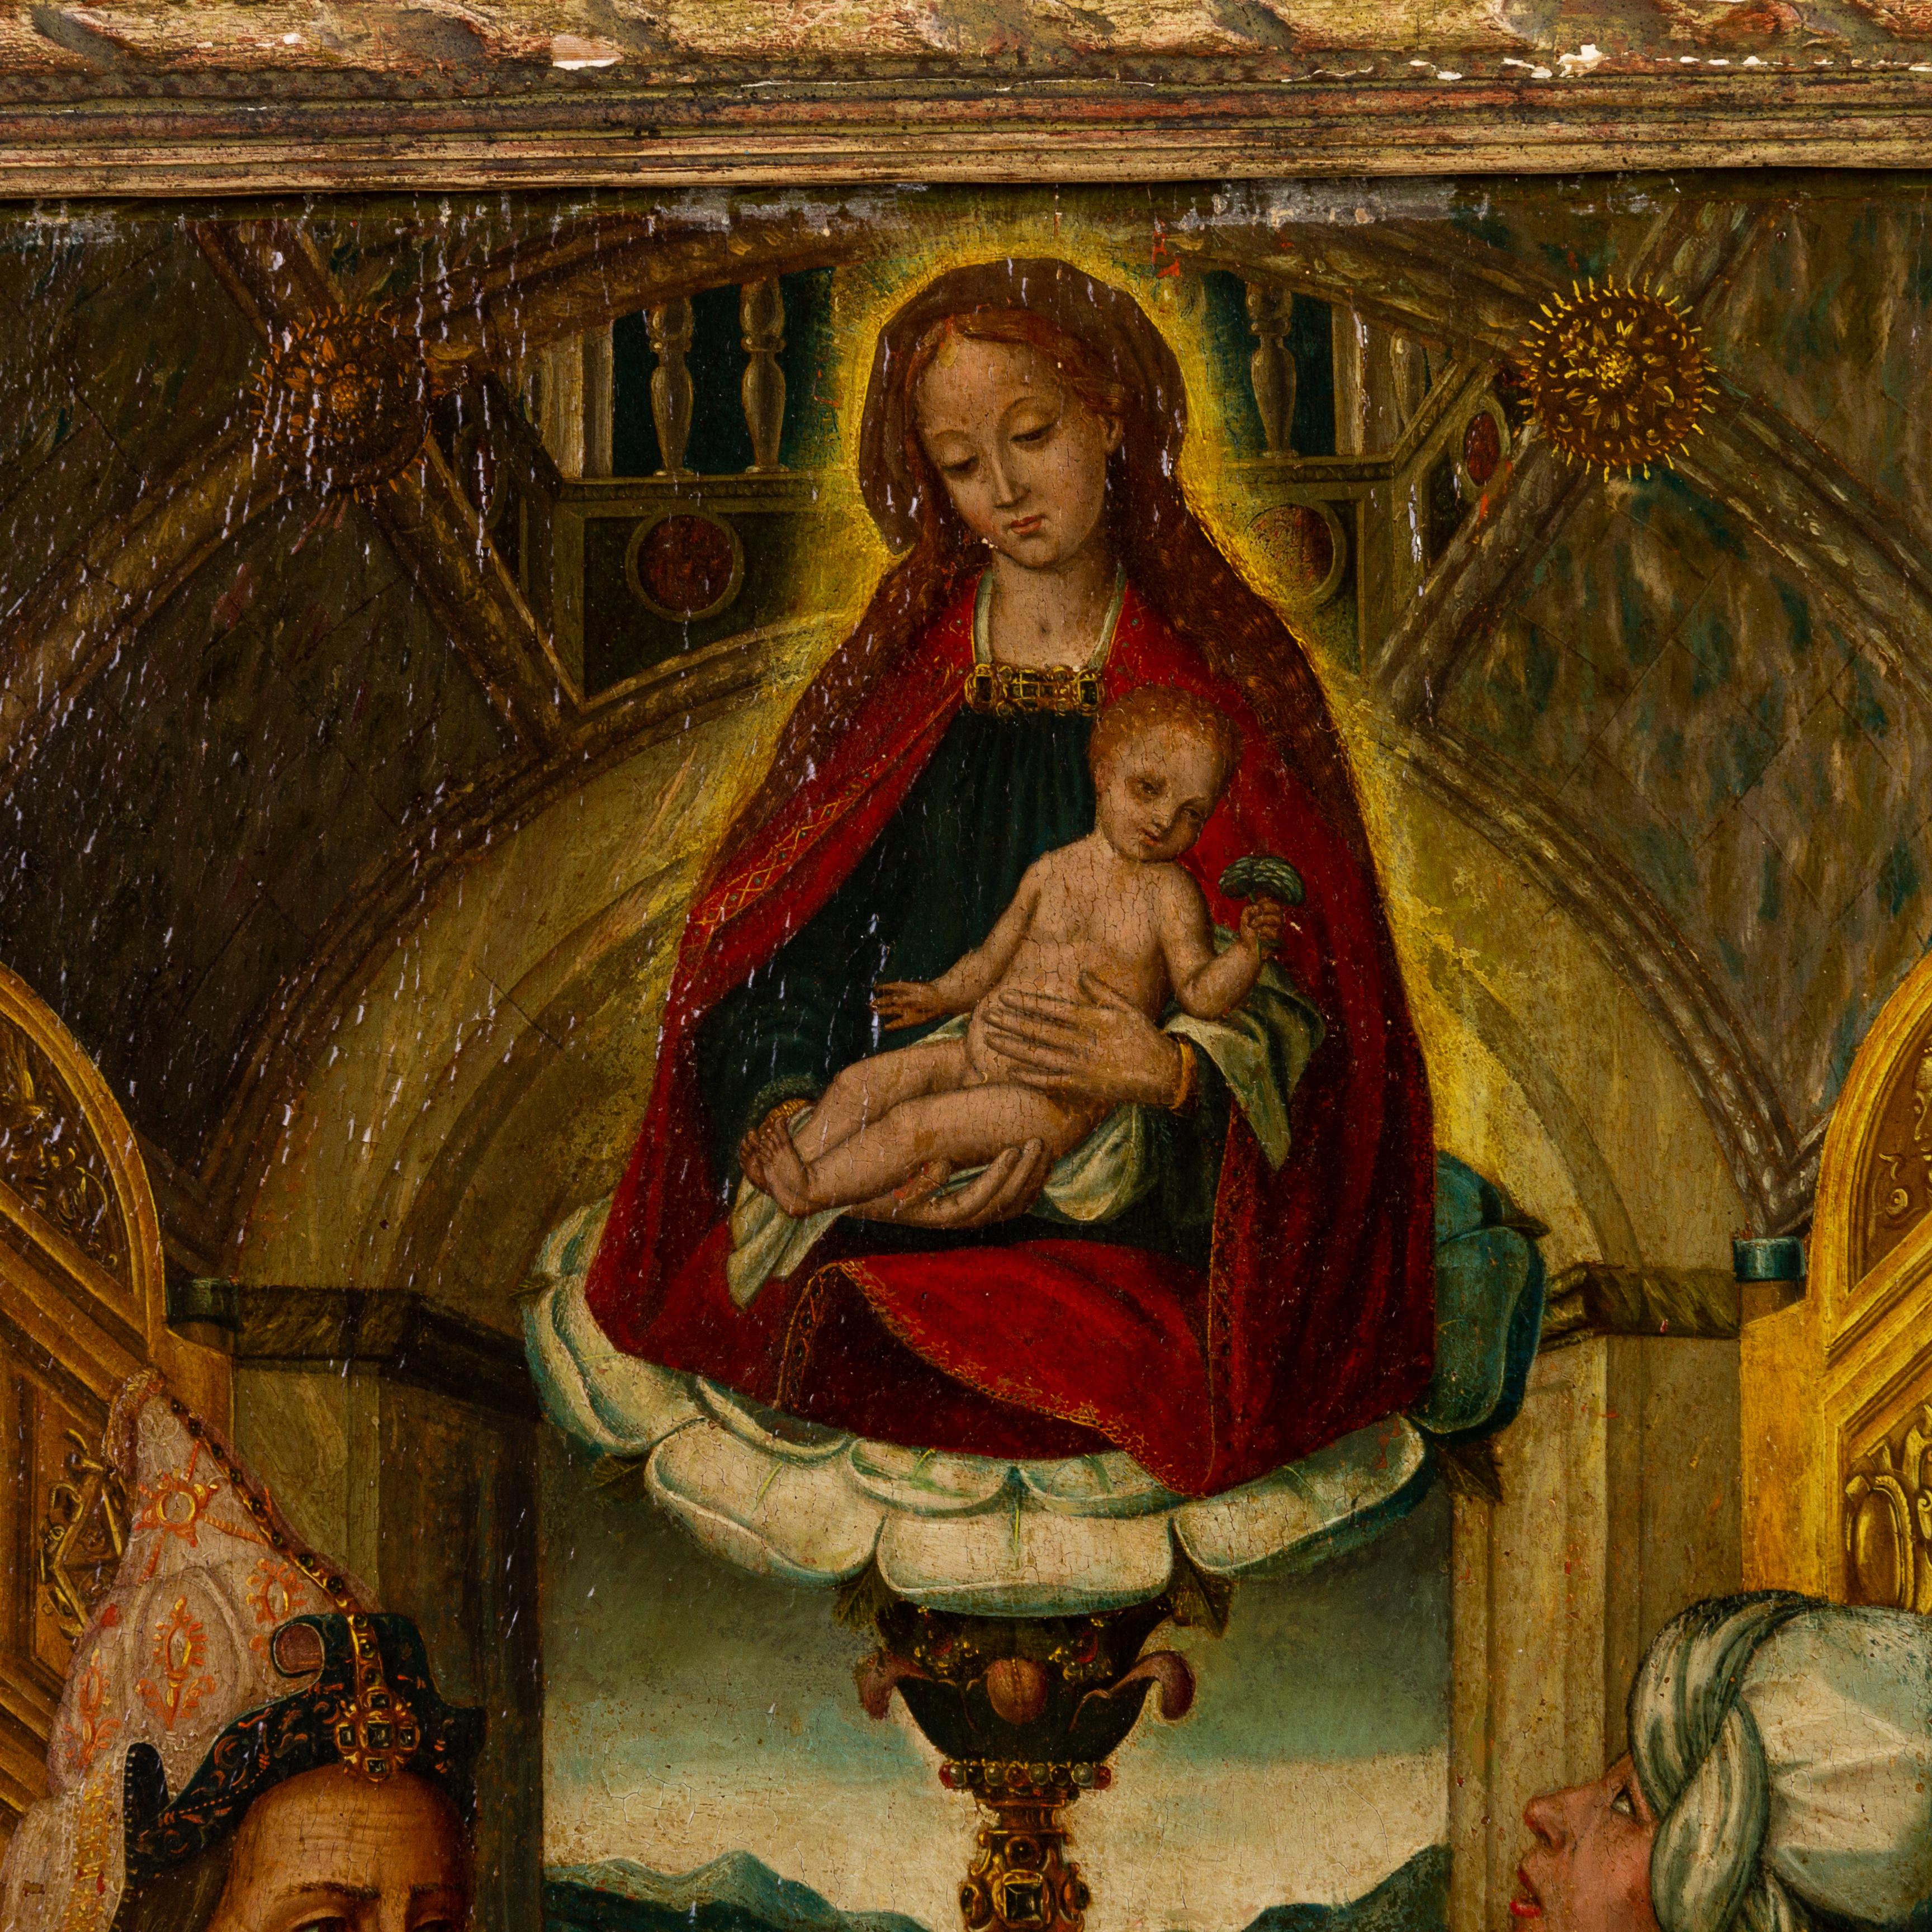 This large 16th century (ca. 1550) Flemish old master oil on panel depicts the divine appearance of the Madonna and Child uniting a royal couple. To the lower left is Saint Anthony, accompanied by a donor to the right, the latter bearing an